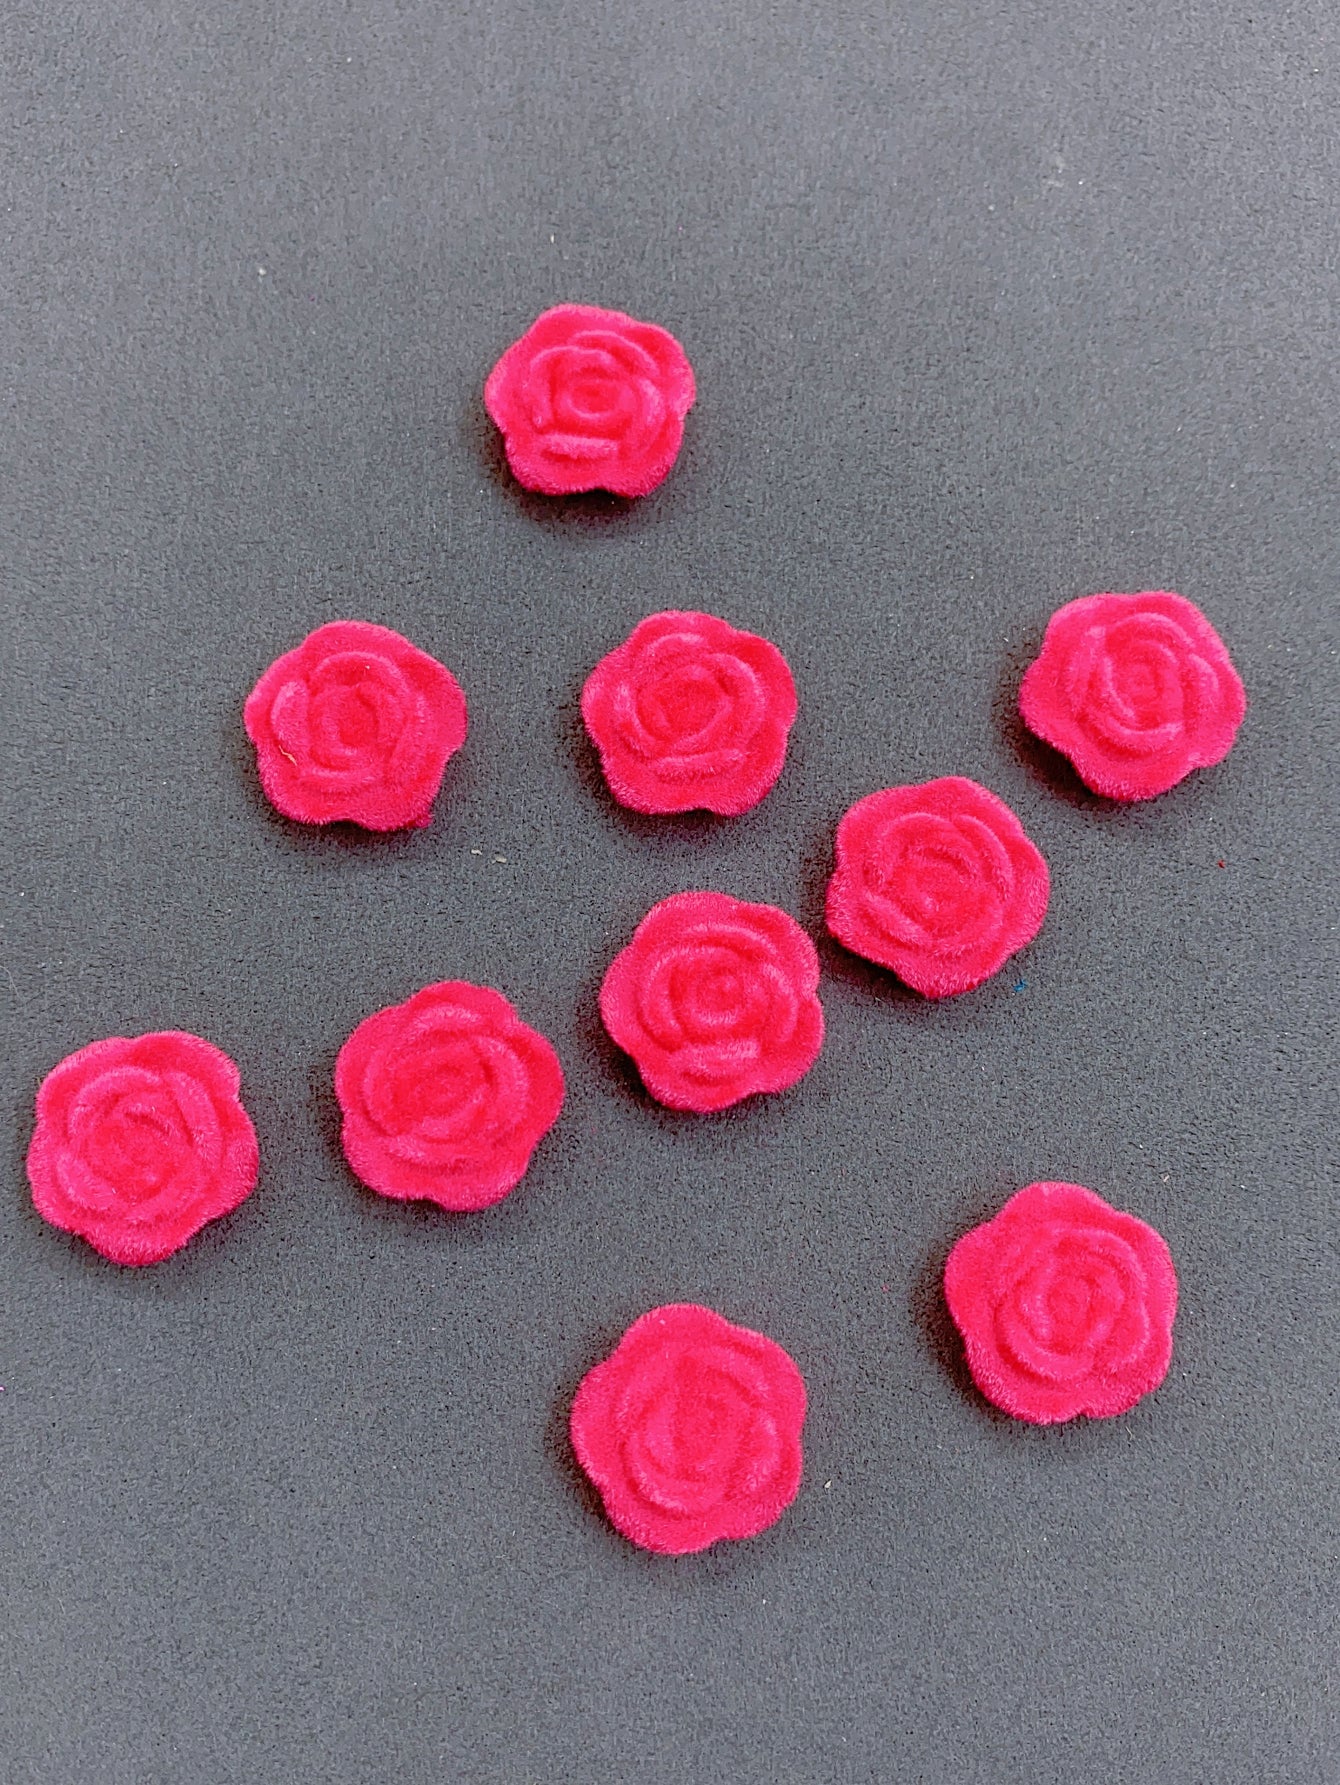 Acrylic solid color single hole straight hole flocking rose beads jewelry accessories hair accessories clothing accessories materials